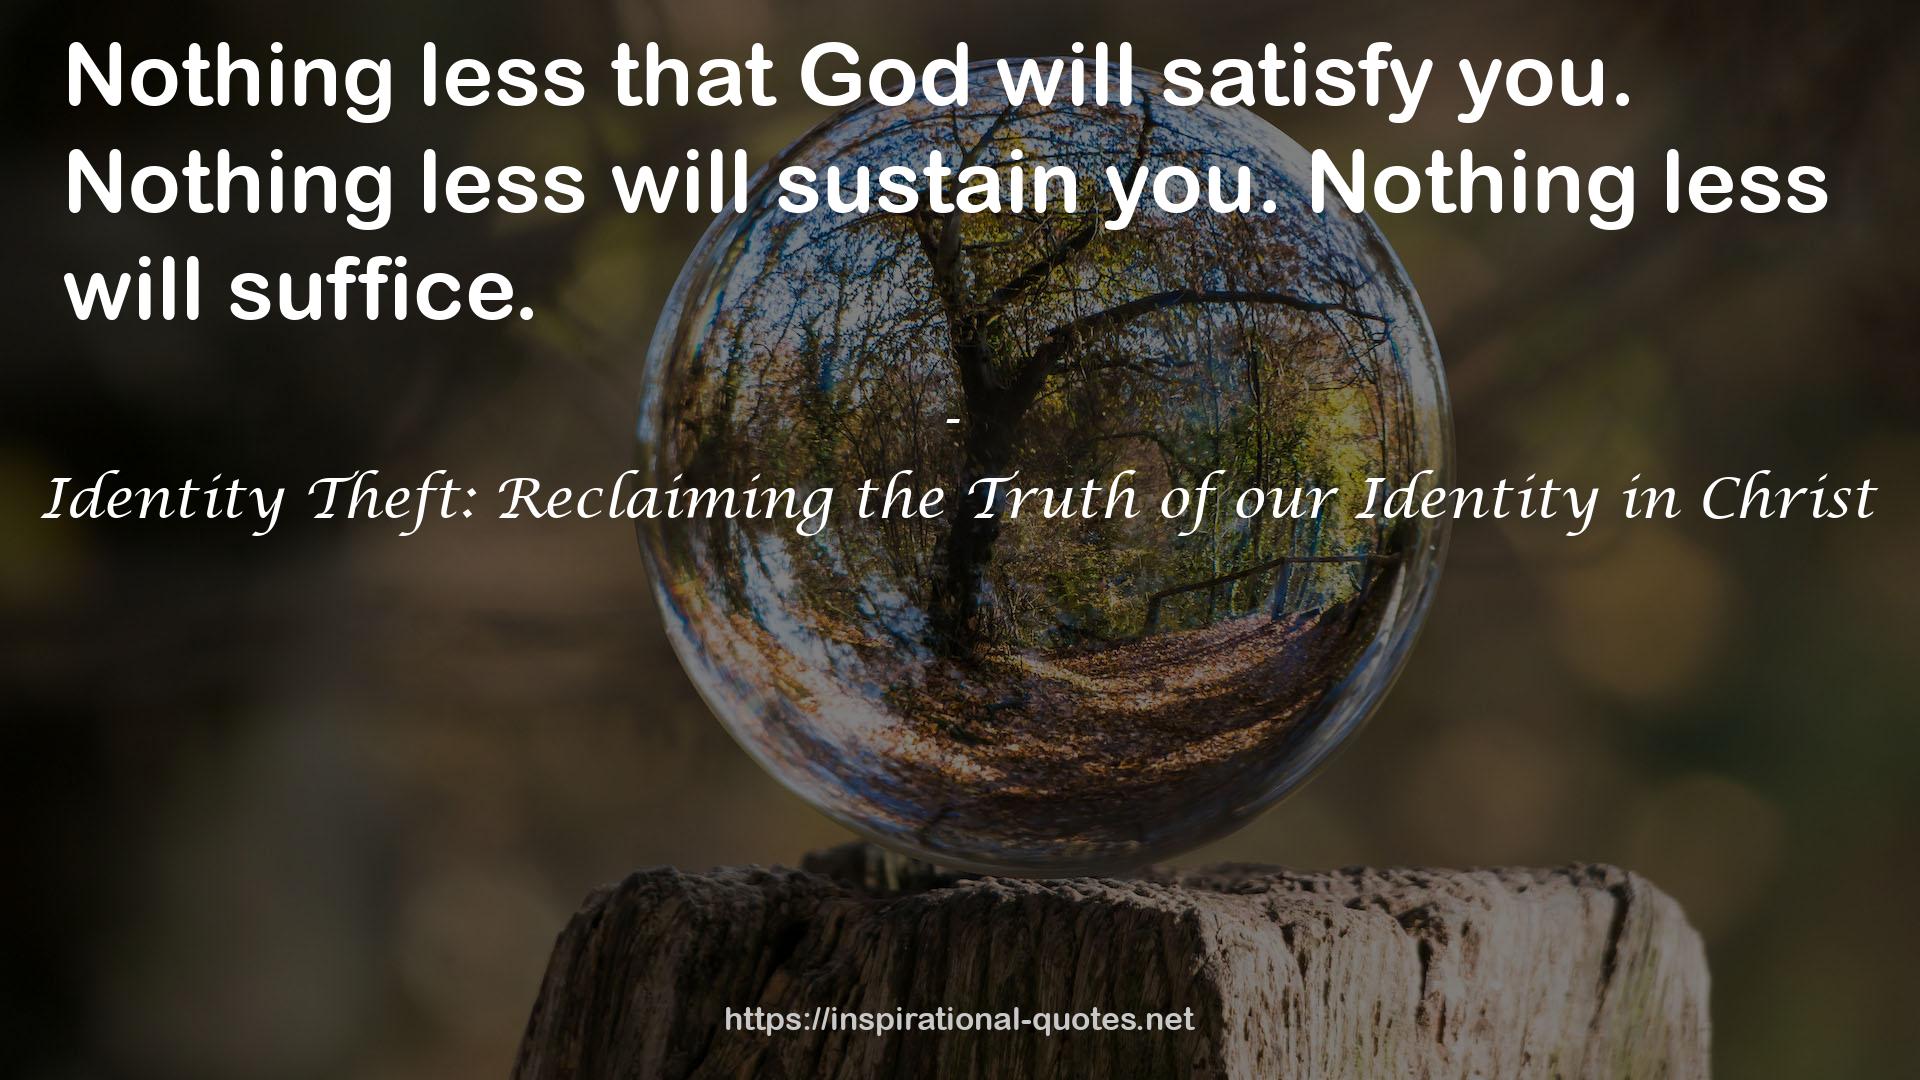 Identity Theft: Reclaiming the Truth of our Identity in Christ QUOTES